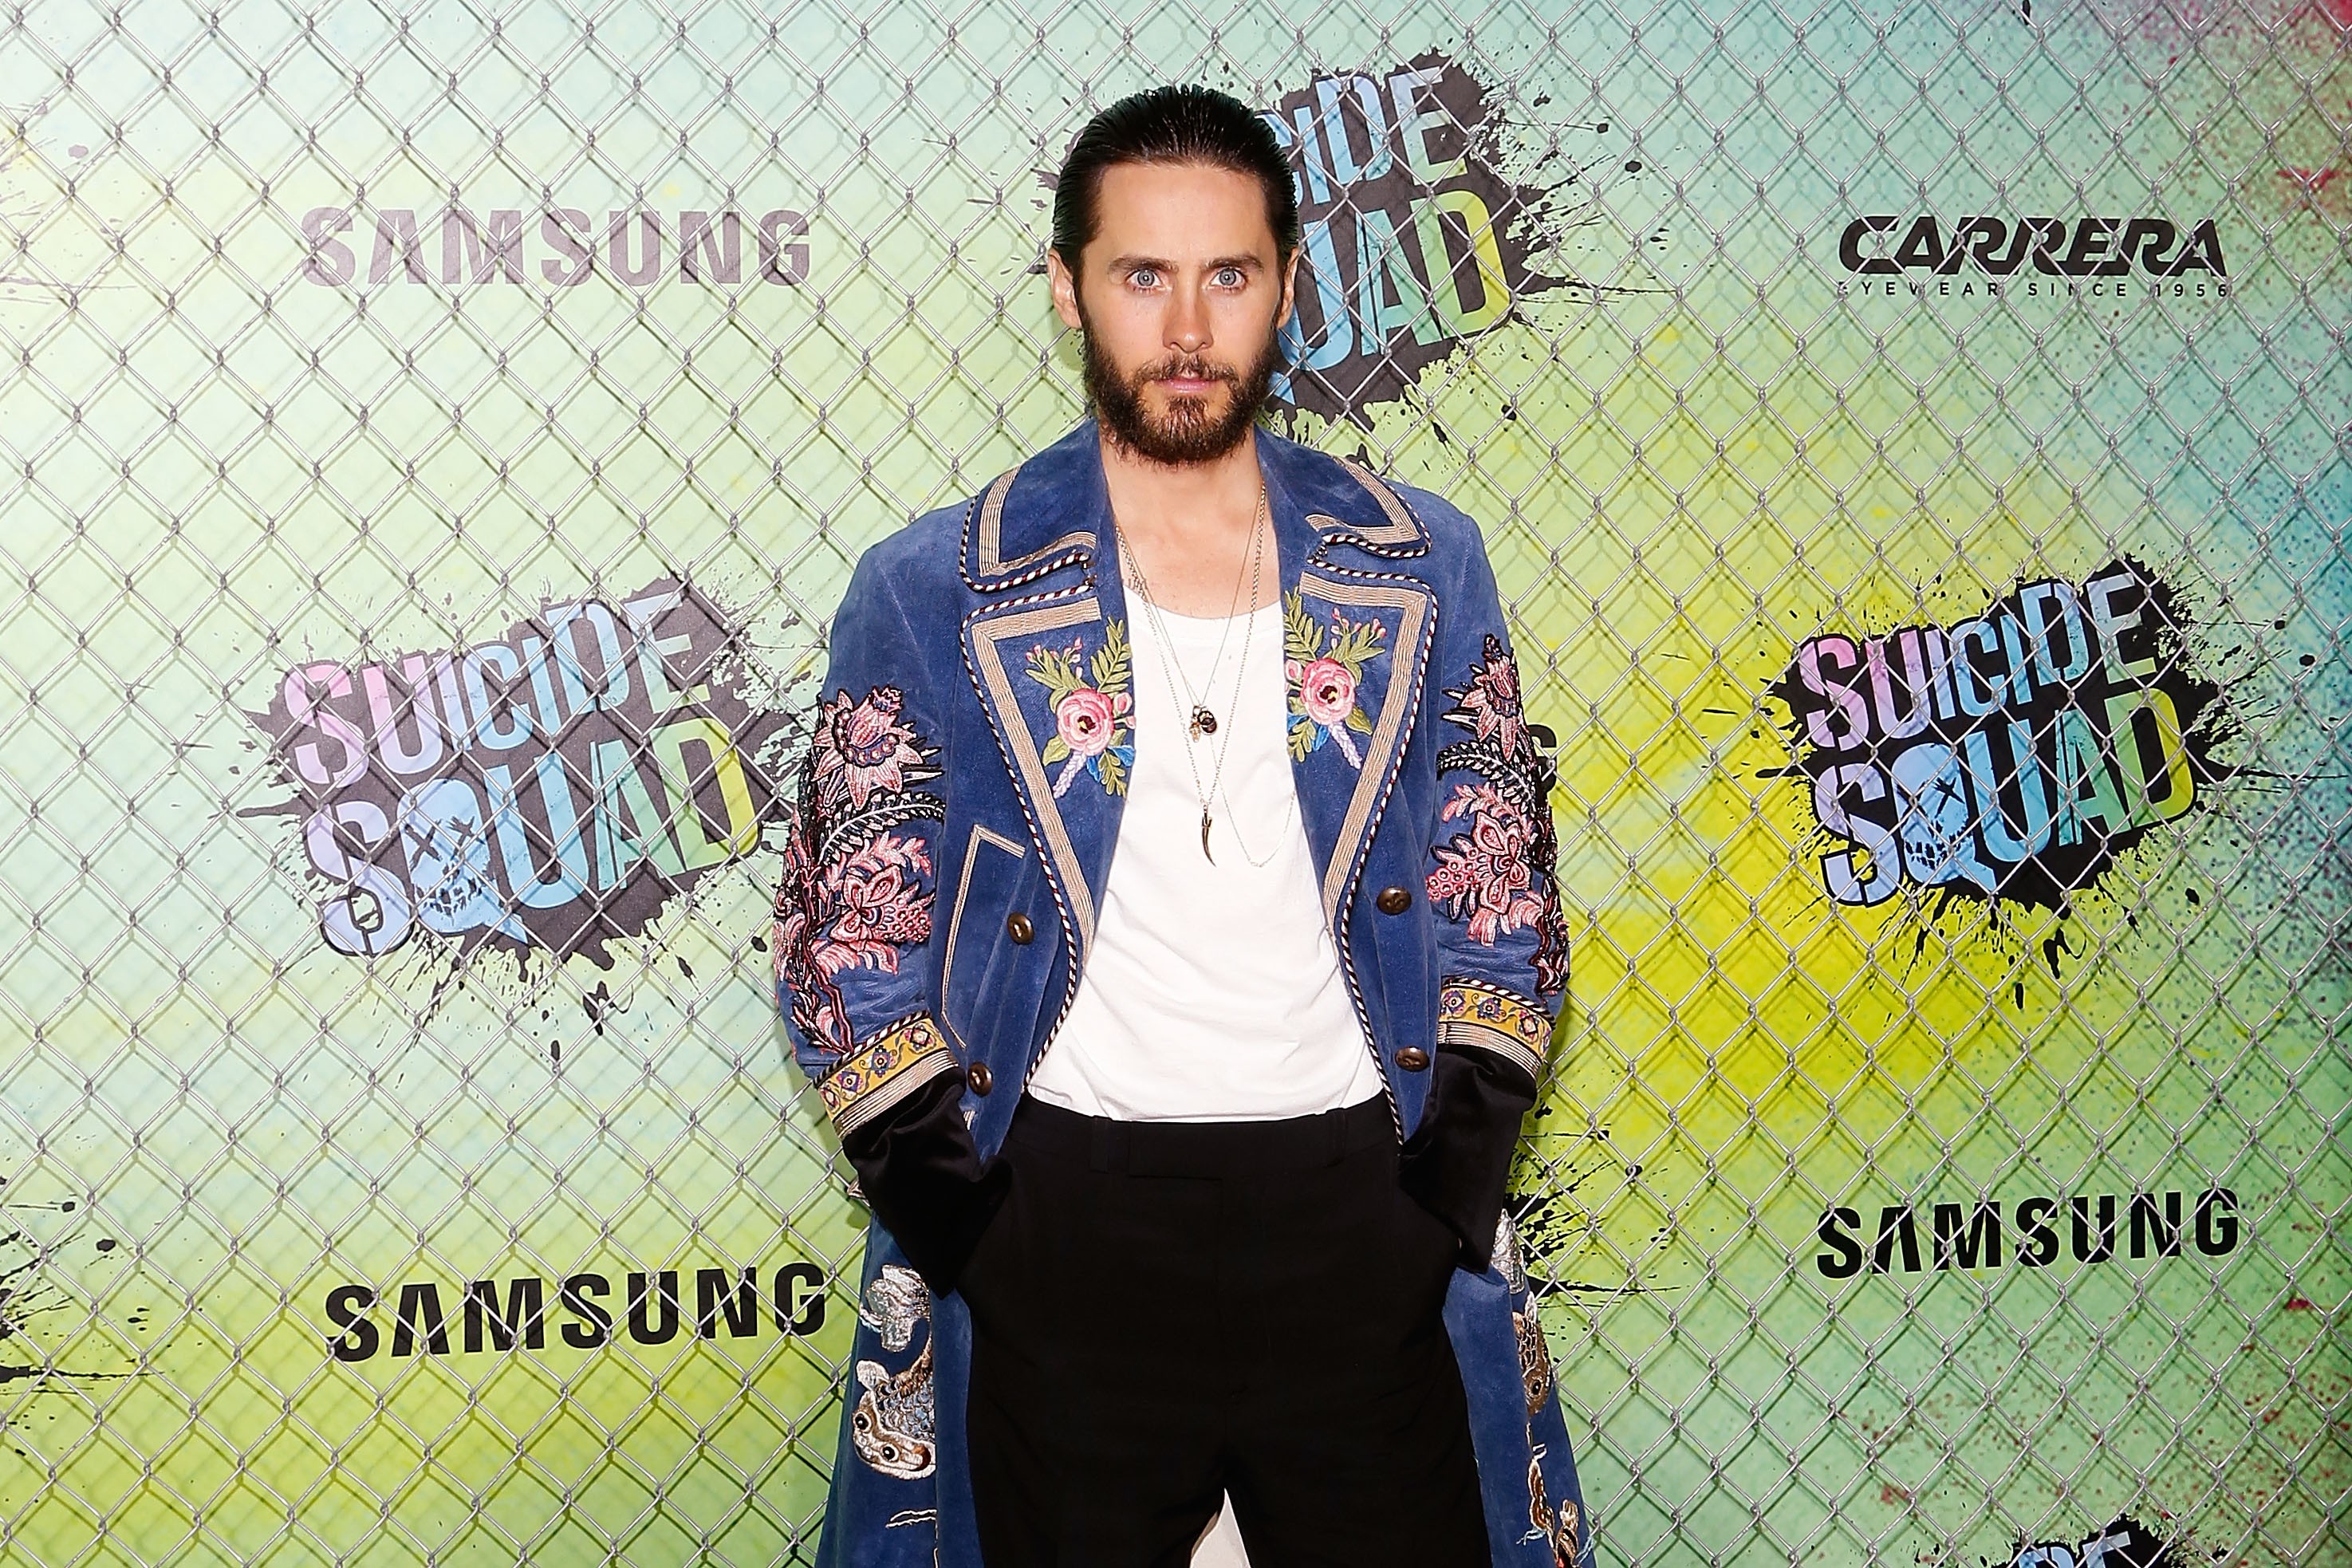 Jared Leto (Foto: Getty Images)